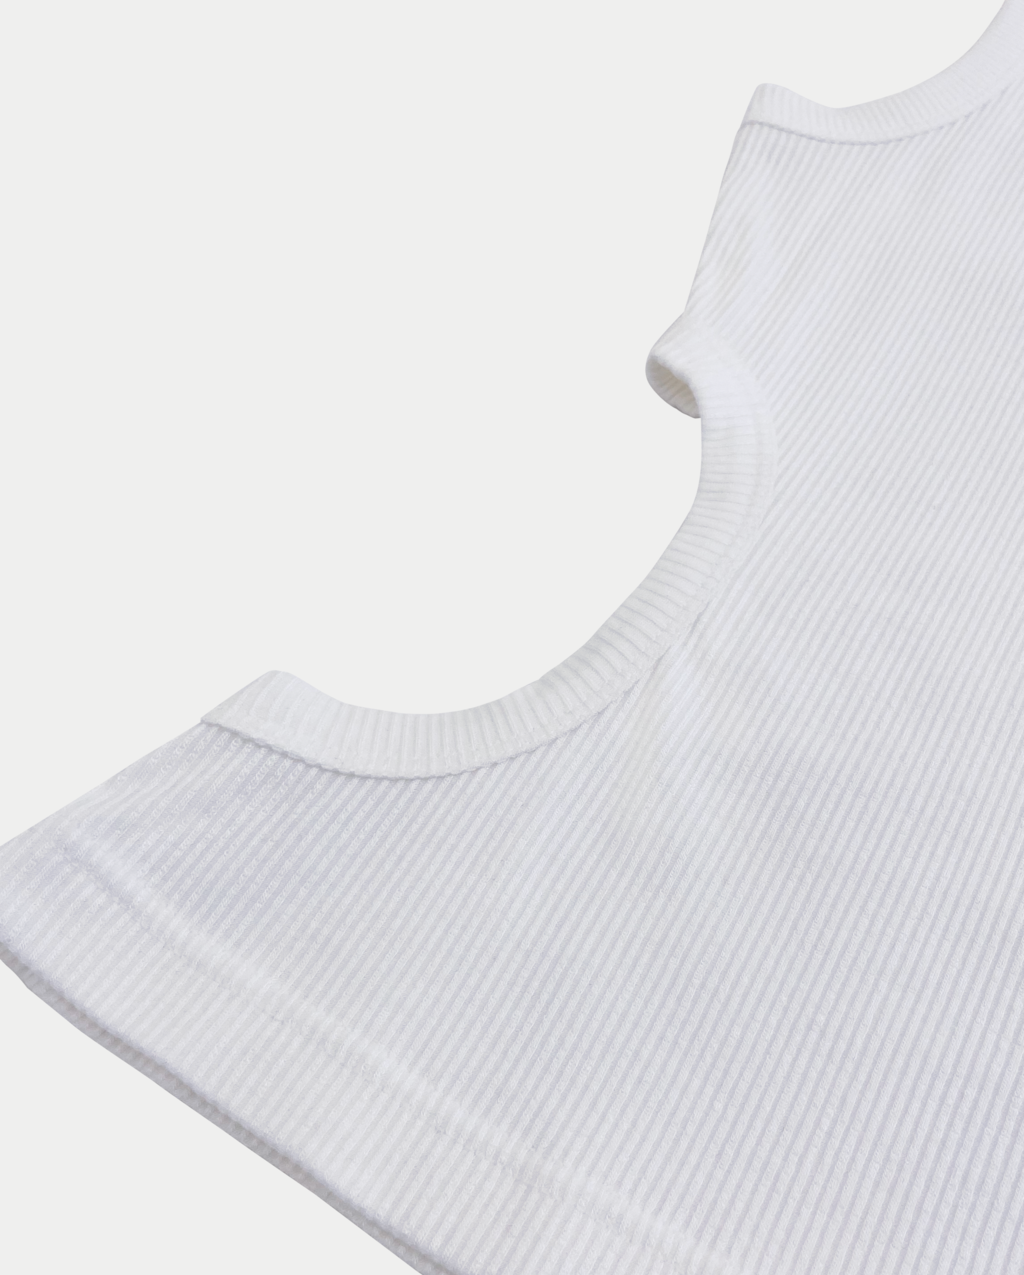 [ECO-FRIENDLY] CUT-OUT SLEEVELESS, WHITE